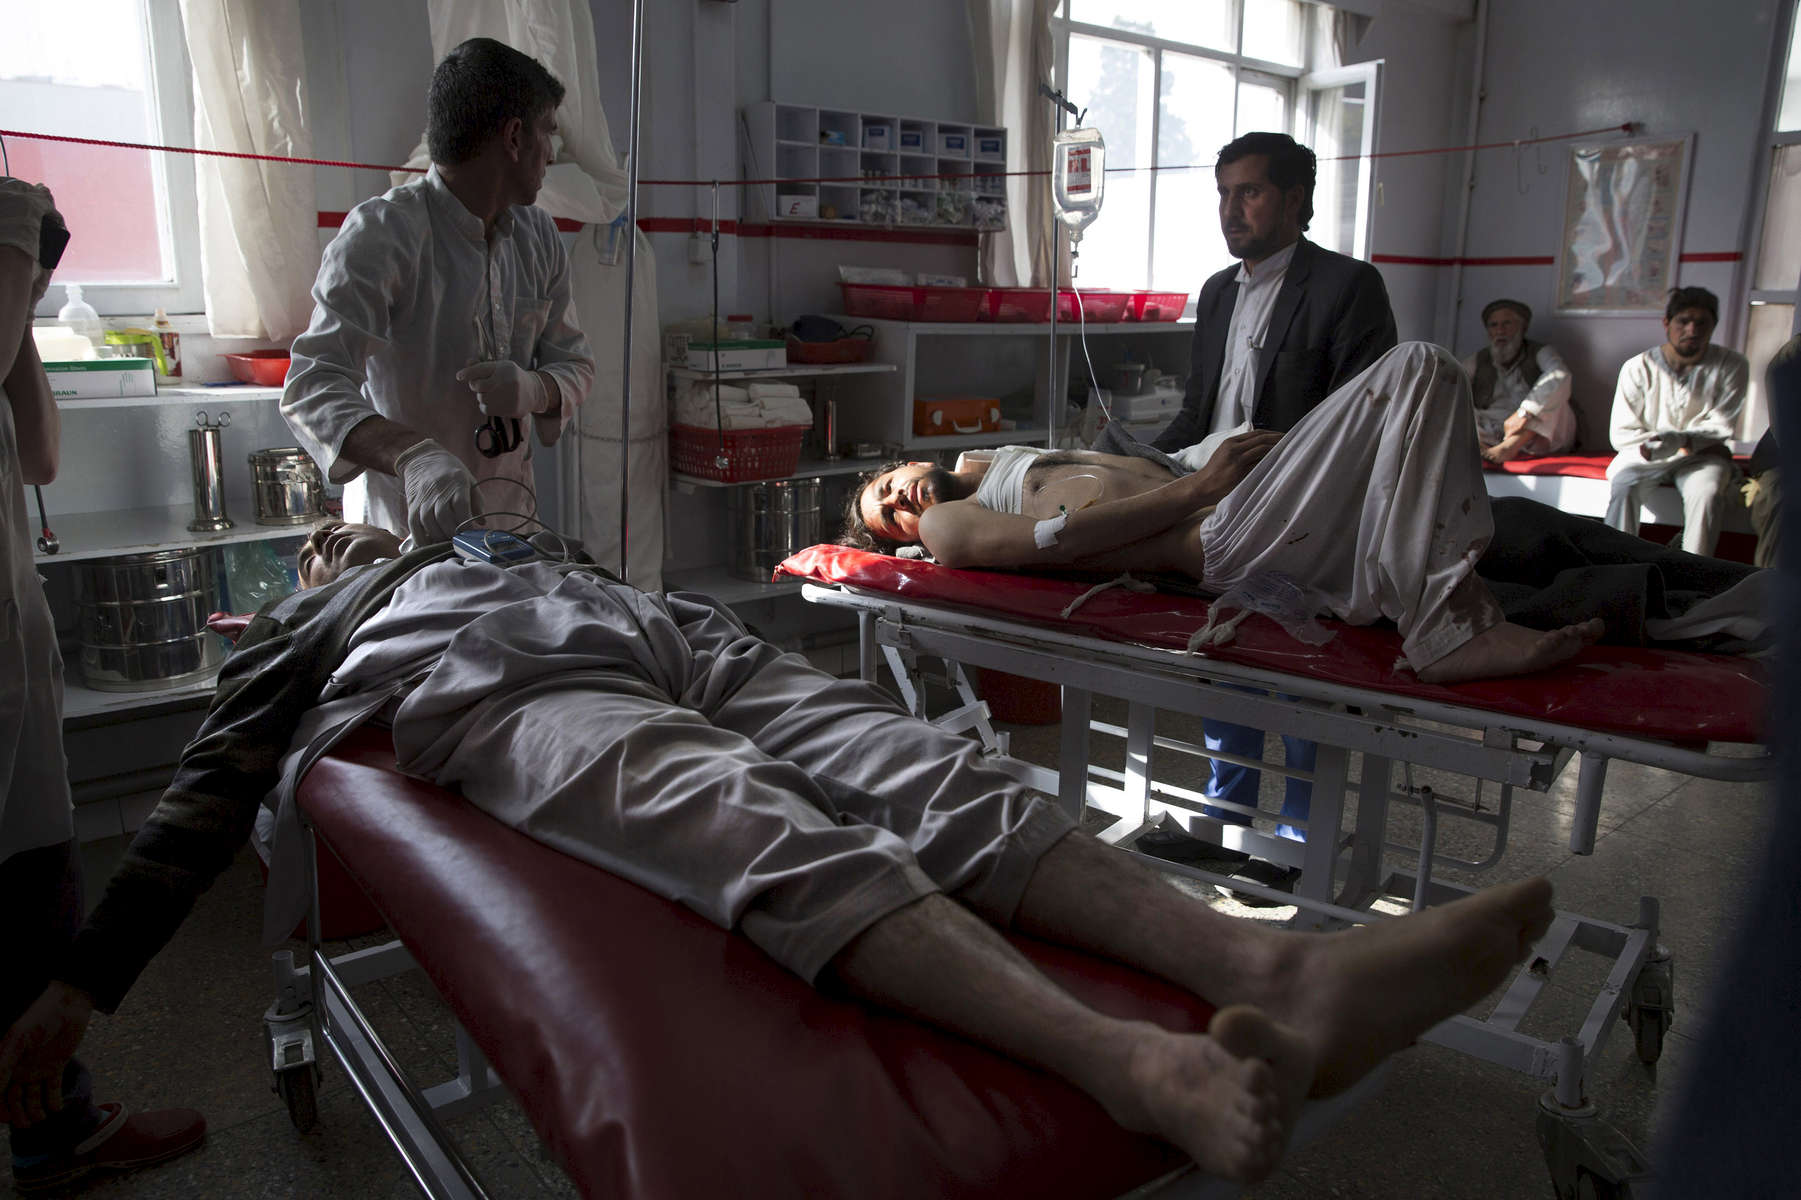 KABUL, AFGHANISTAN -APRIL 6, 2016:   A the Emergency hospital multiple patients are treated in the OPD emergency area after a bomb blast in Ghorband ( near Parwan) killed 6 and injured dozens in Kabul on April 6, 2016. Afghan civilians are at greater risk today than at any time since Taliban rule. According to UN statistics, in the first half of 2016 at least 1,600 people had died, and more than 3,500 people were injured, a 4 per cent increase in overall civilian causalities compared to the same period last year. The upsurge in violence has had devastating consequences for civilians, with suicide bombings and targeted attacks by the Taliban and other insurgents causing 70 percent of all civilian casualties.  